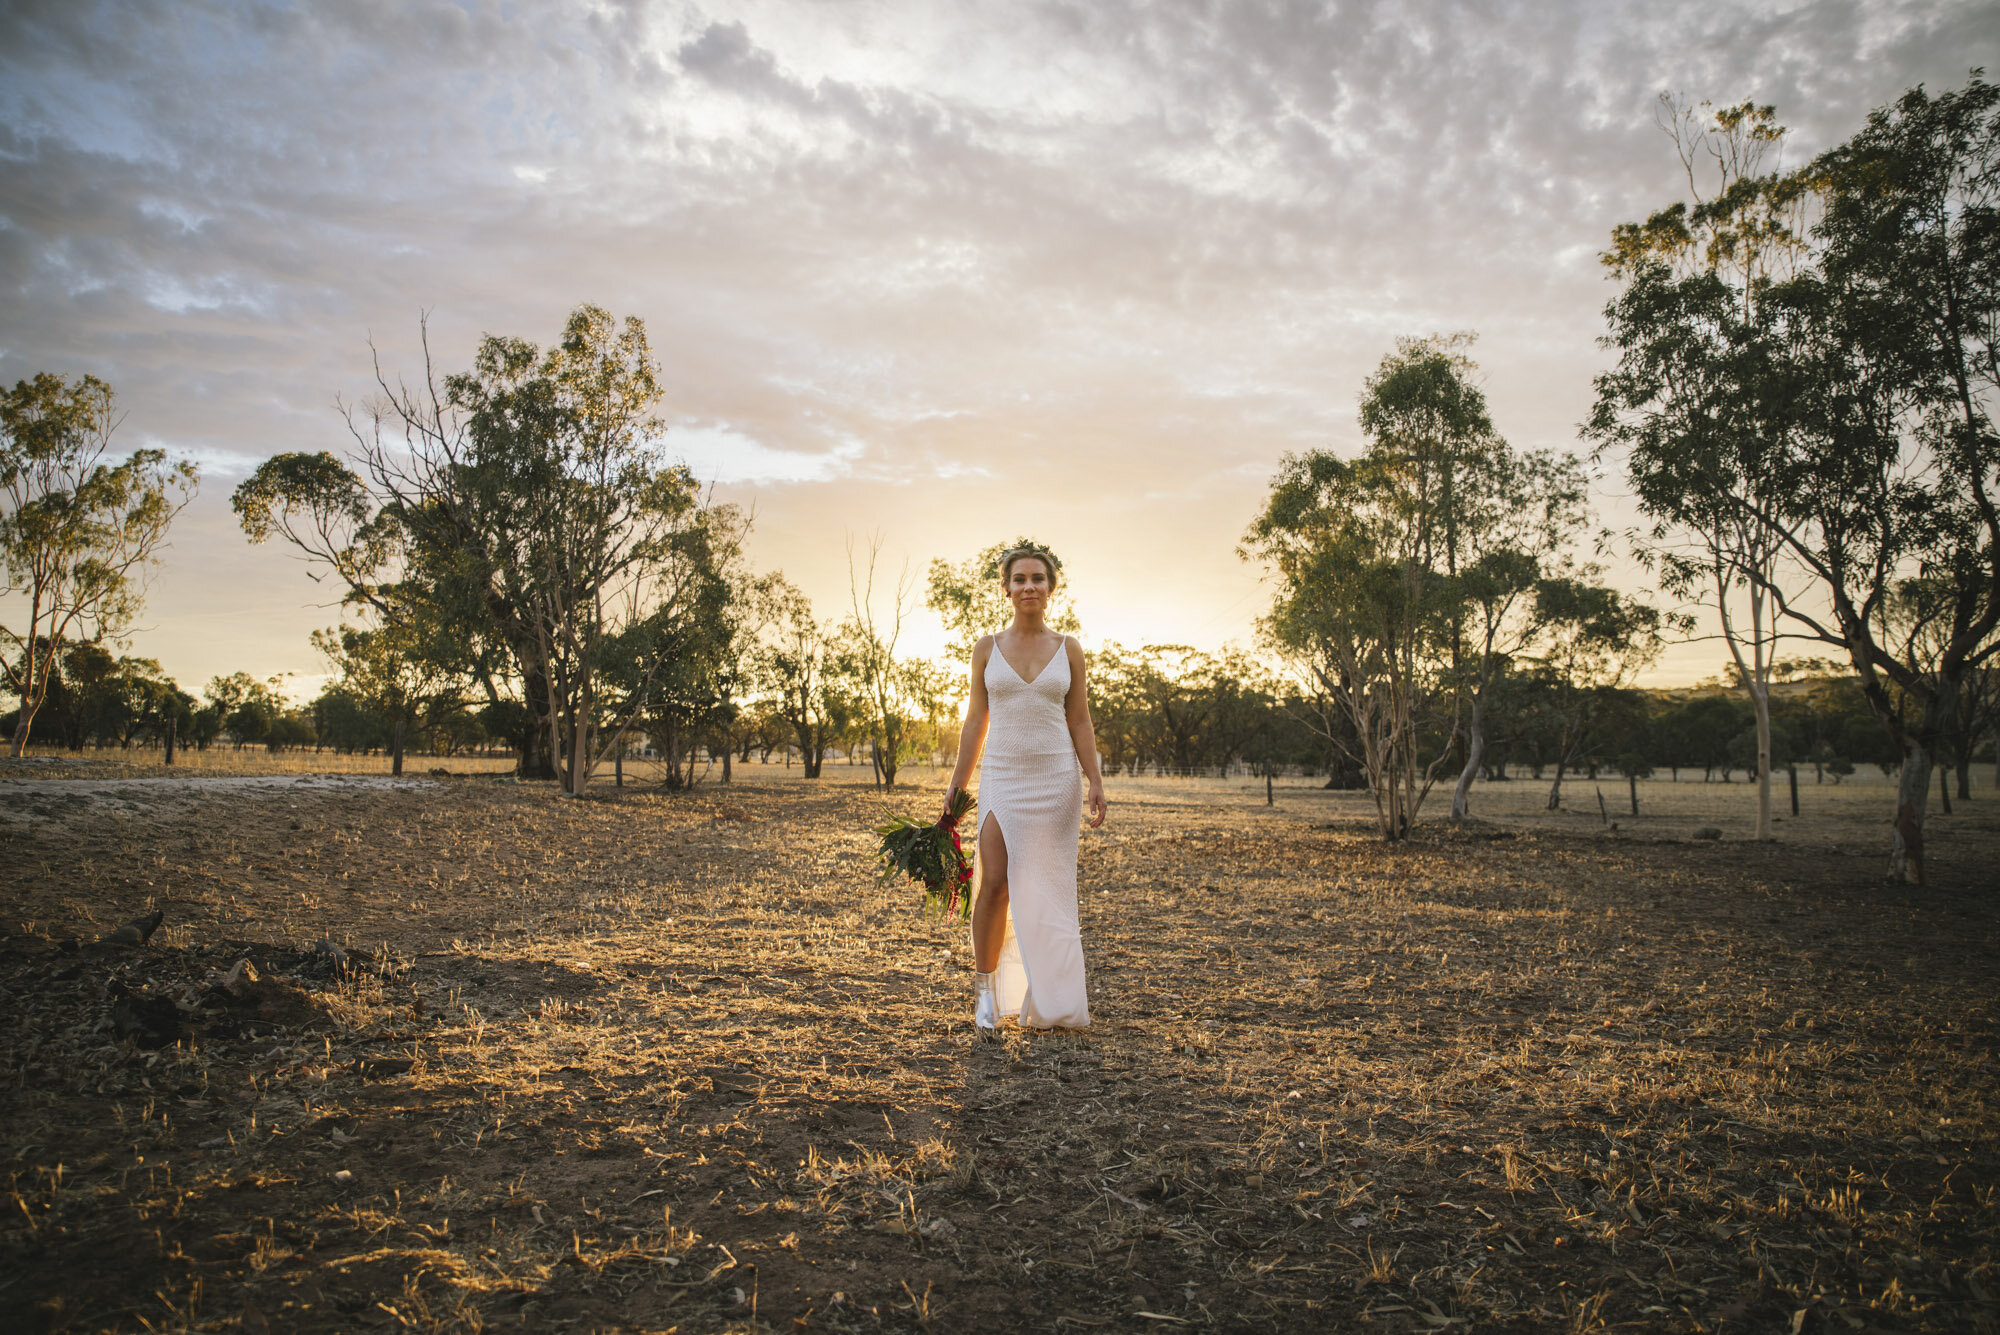 Angie-Roe-Photography-Wedding-Buckland-Northam-Wheatbelt-Rustic-Rural-Country (36).jpg